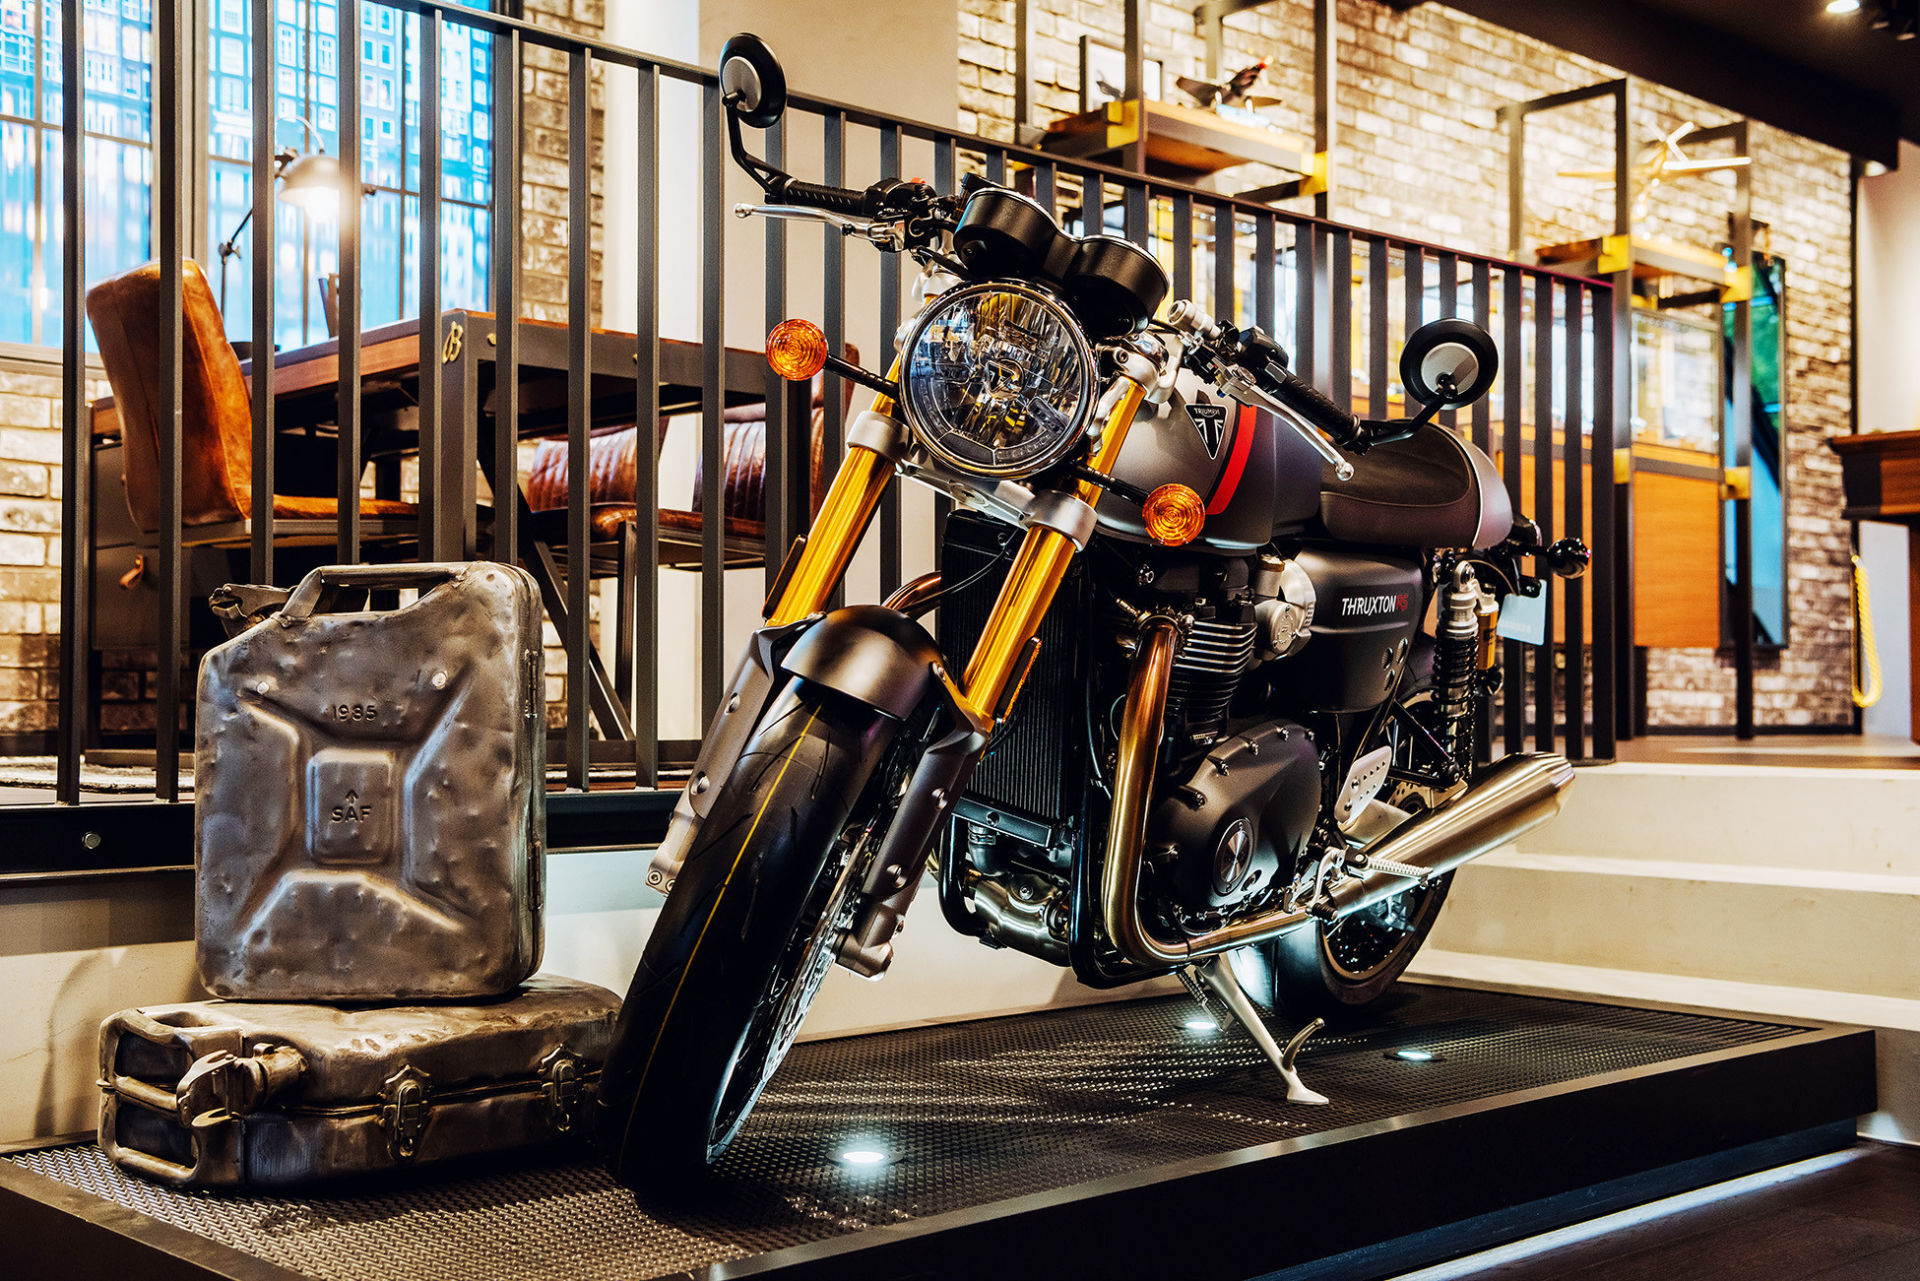 Breitling watches and Triumph motorcycles have formed a promotional partnership which includes displaying bikes in Breitling boutiques worldwide.